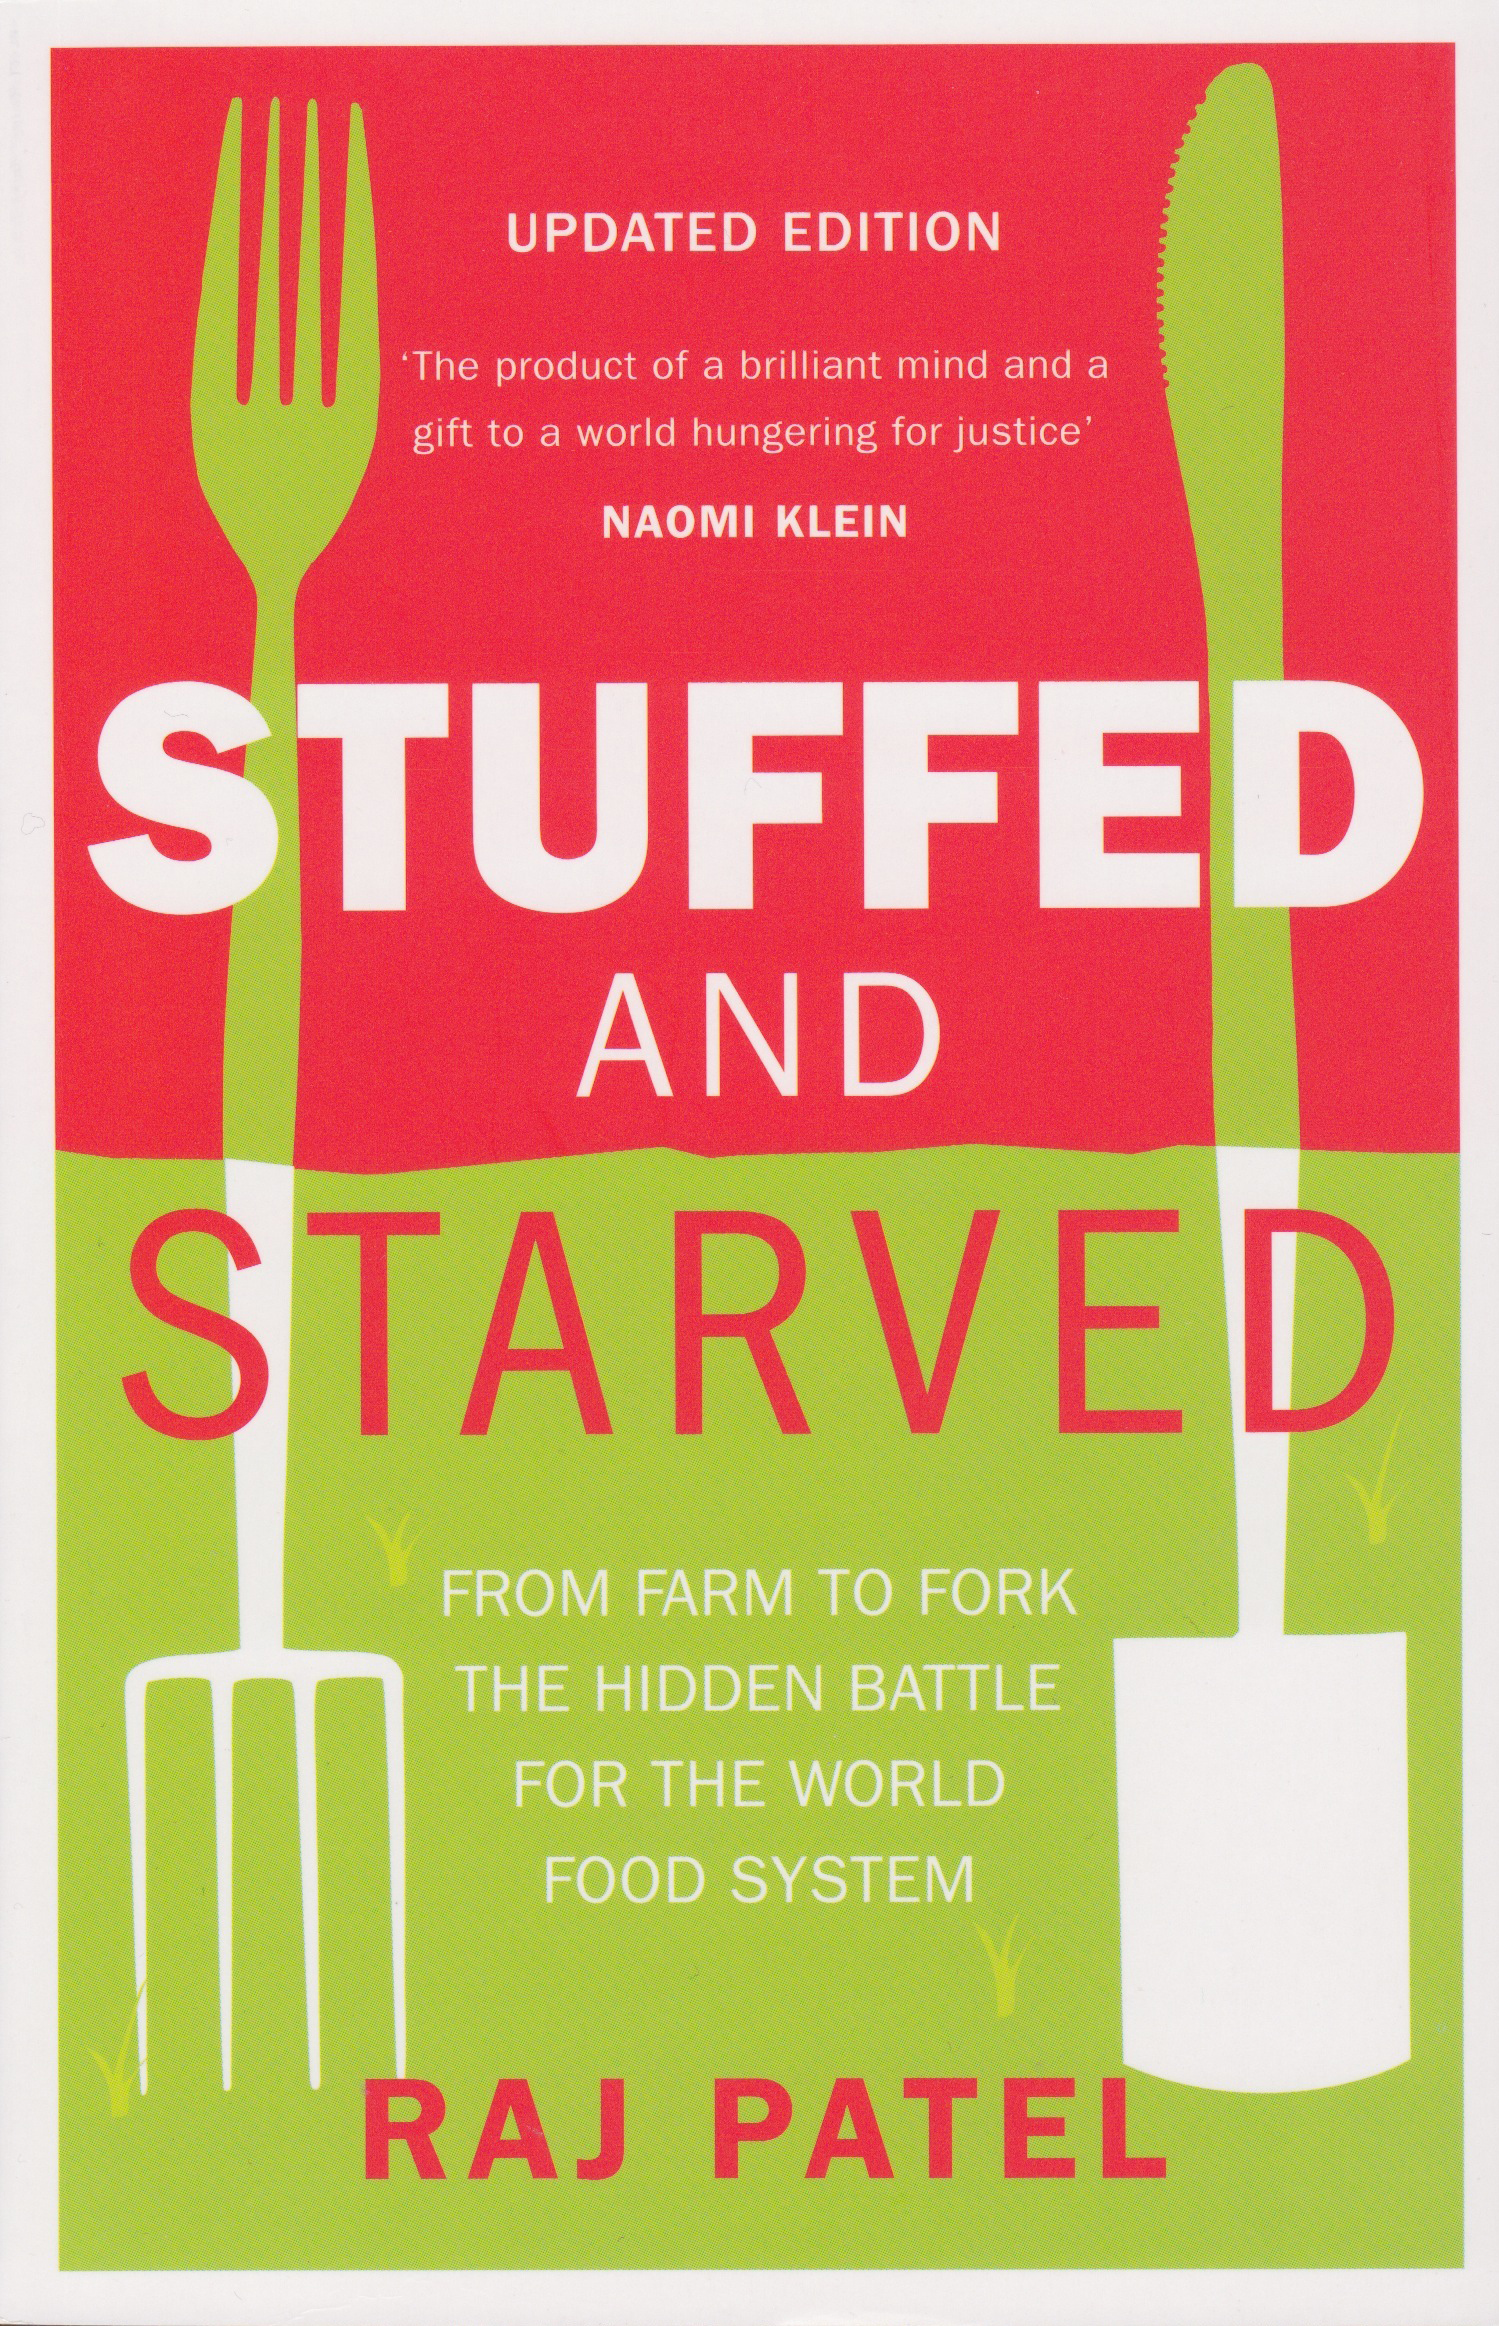 Raj Patel: Stuffed and Starved: From Farm to Fork. The Hidden Battle for the World Food System. Portobello Books 2007, päivitetty painos 2013, 416 s.